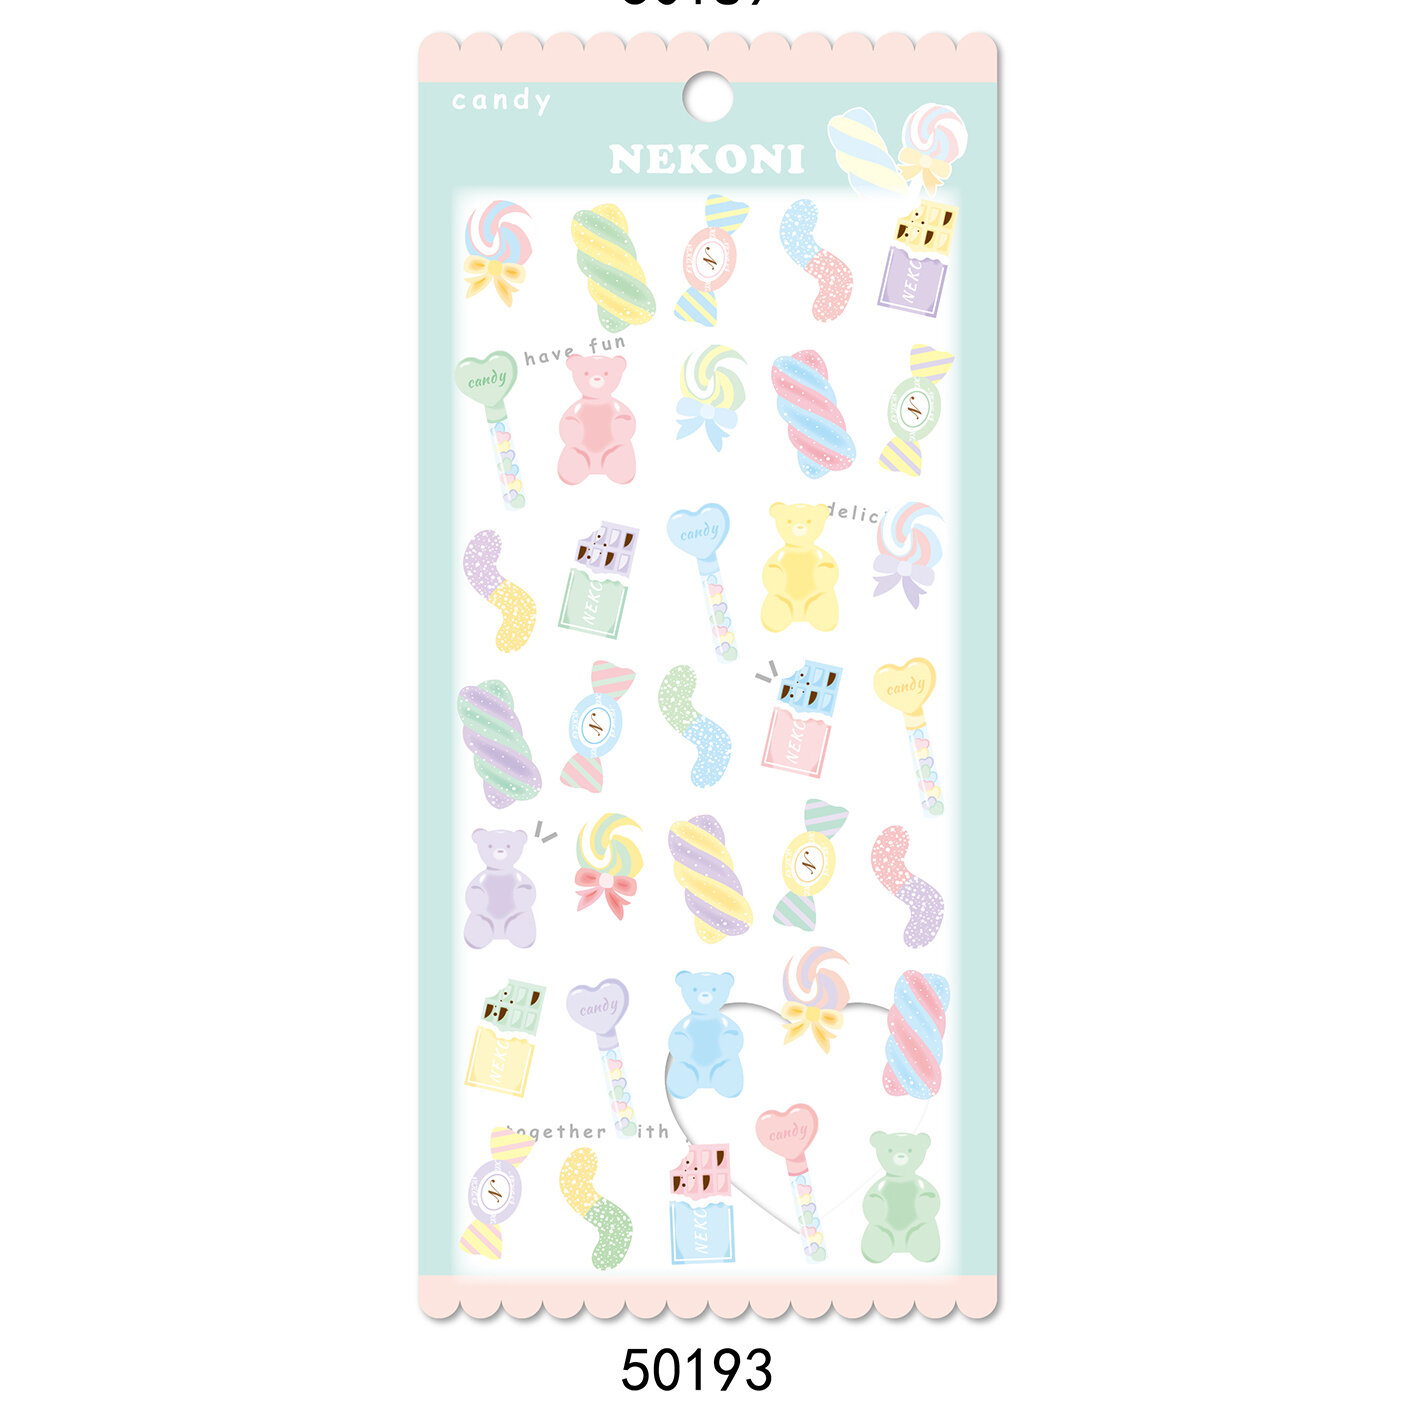 Stickers - Pastel candy (50193)